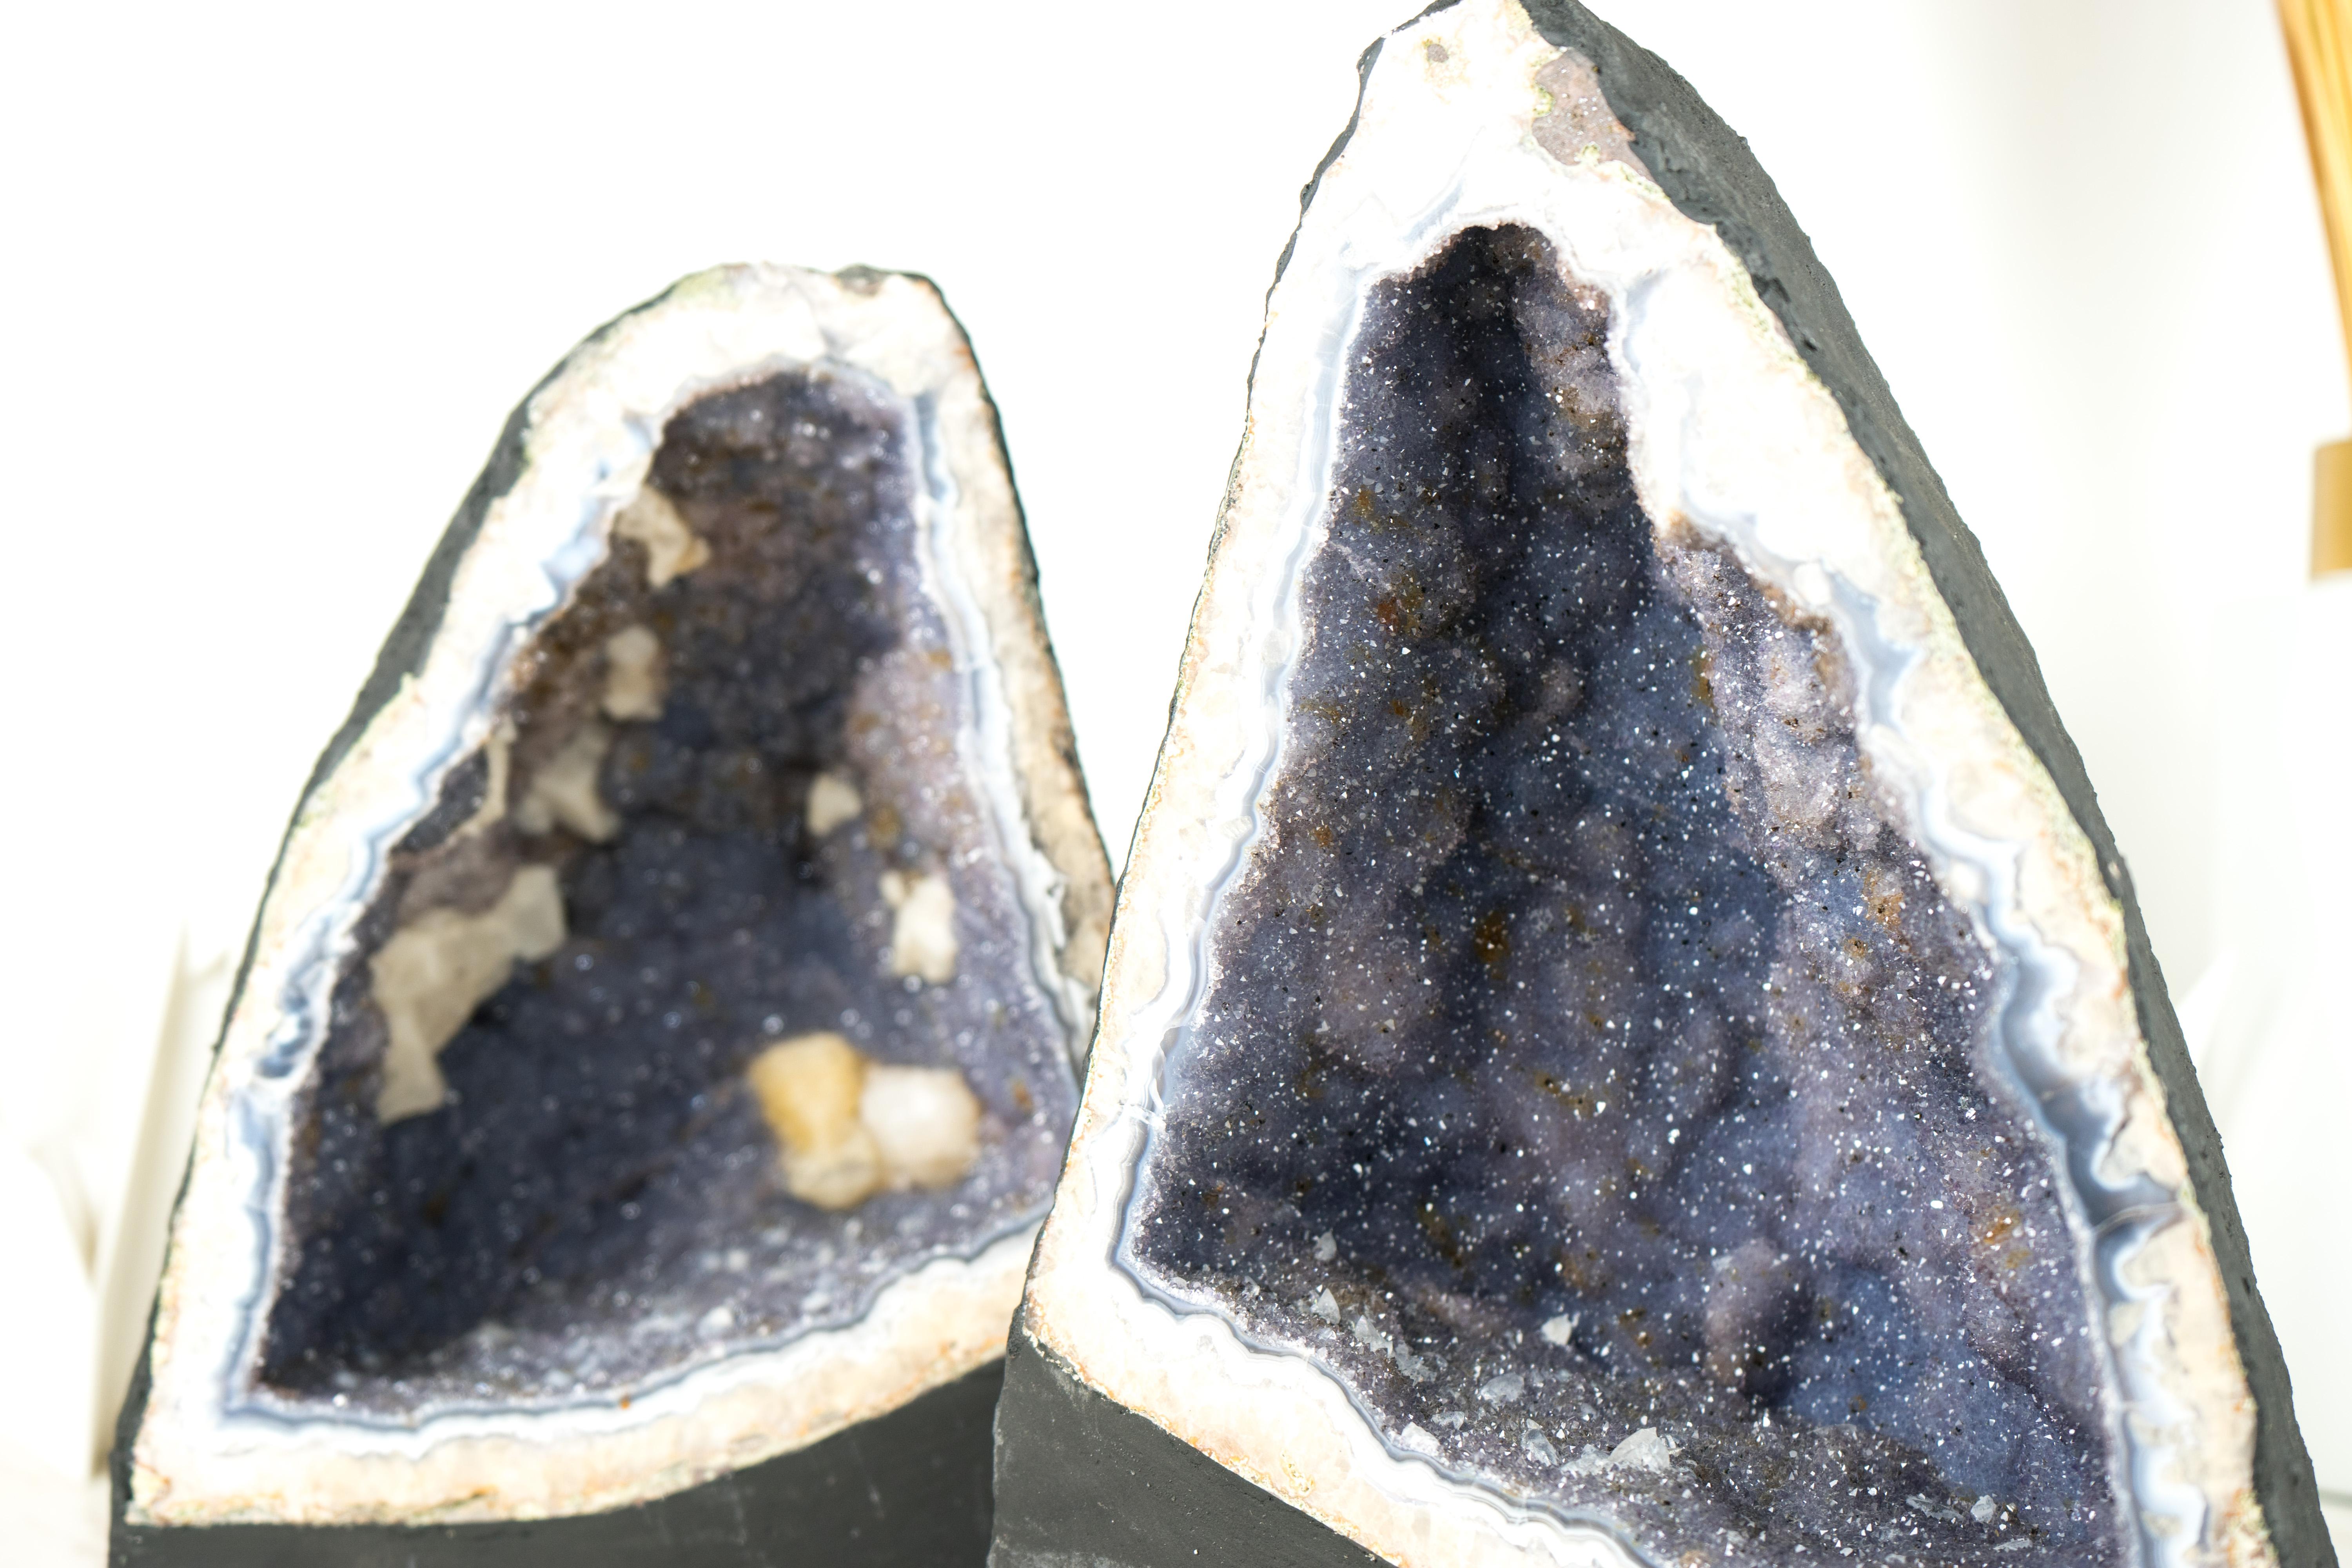 Pair of Blue Lace Agate Geodes with Lavender Amethyst Druzy, Rare Sparkly Geodes For Sale 5